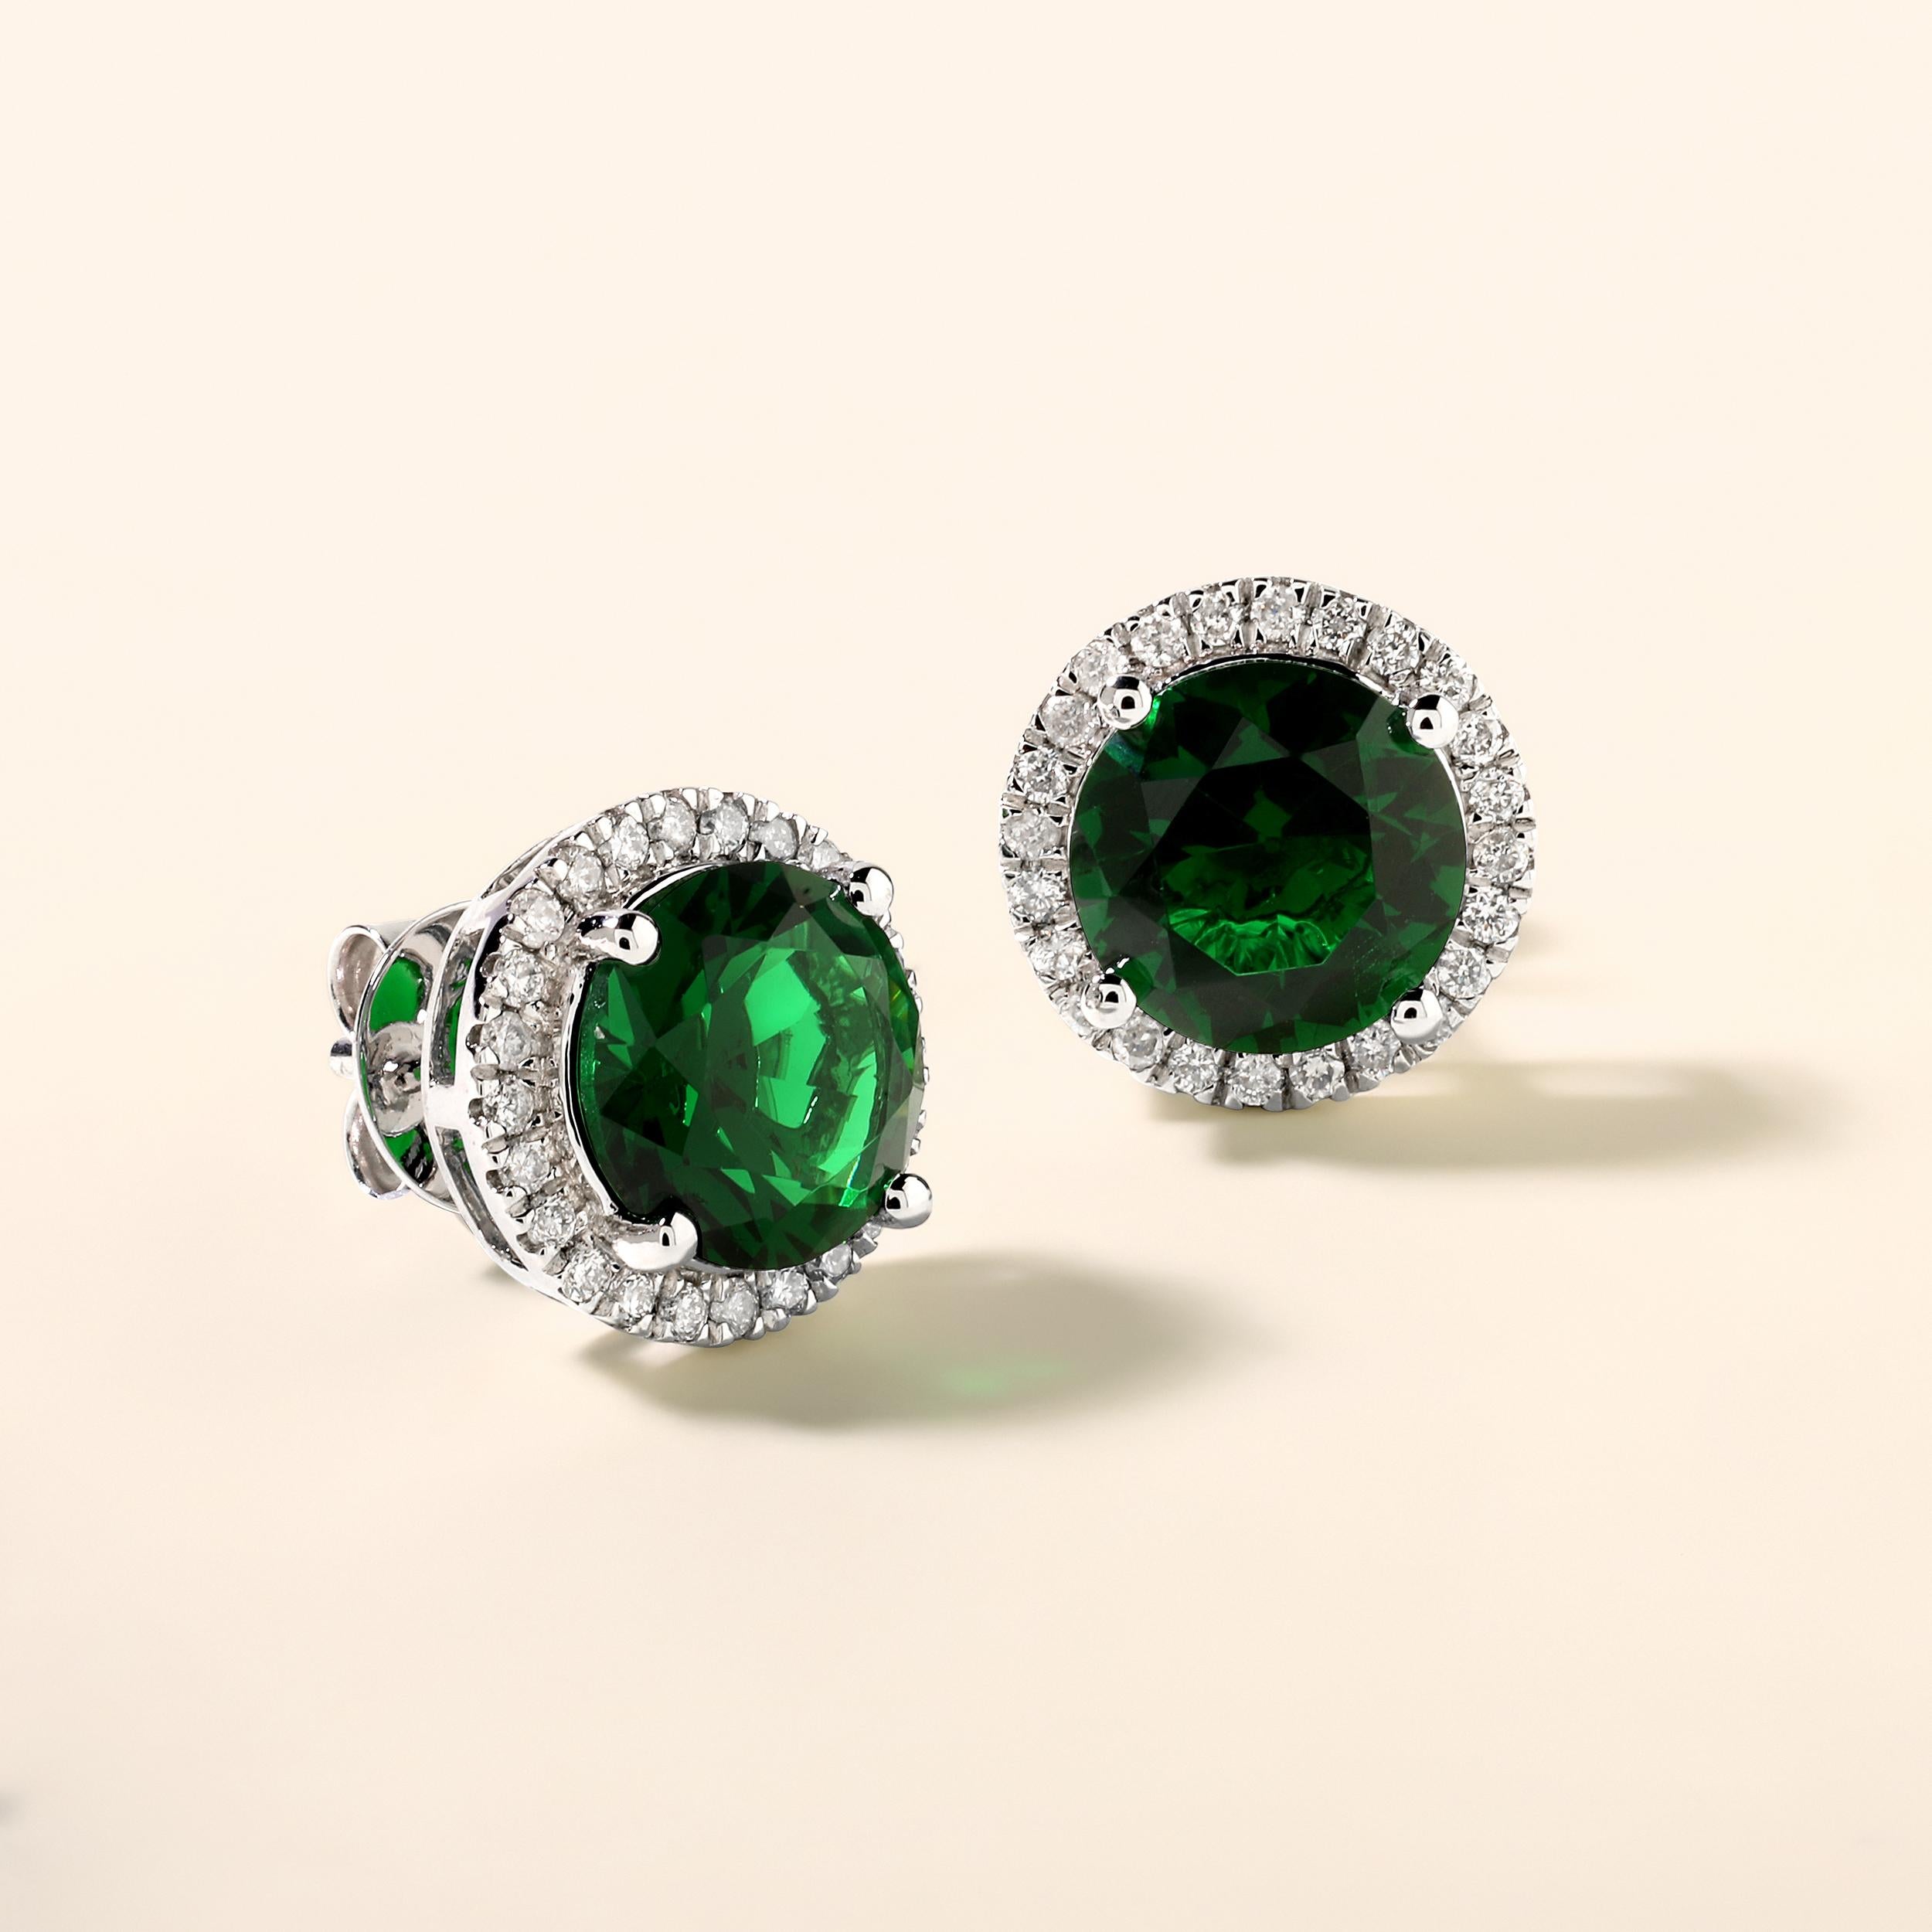 Crafted in 5.45 grams of 14K White Gold, the earrings contains 48 stones of Round Diamonds with a total of 0.45 carat in F-G color and I1-I2 clarity combined with 2 stones of Lab Created Emerald Gemstone with a total of 4.26 carat.

This jewelry